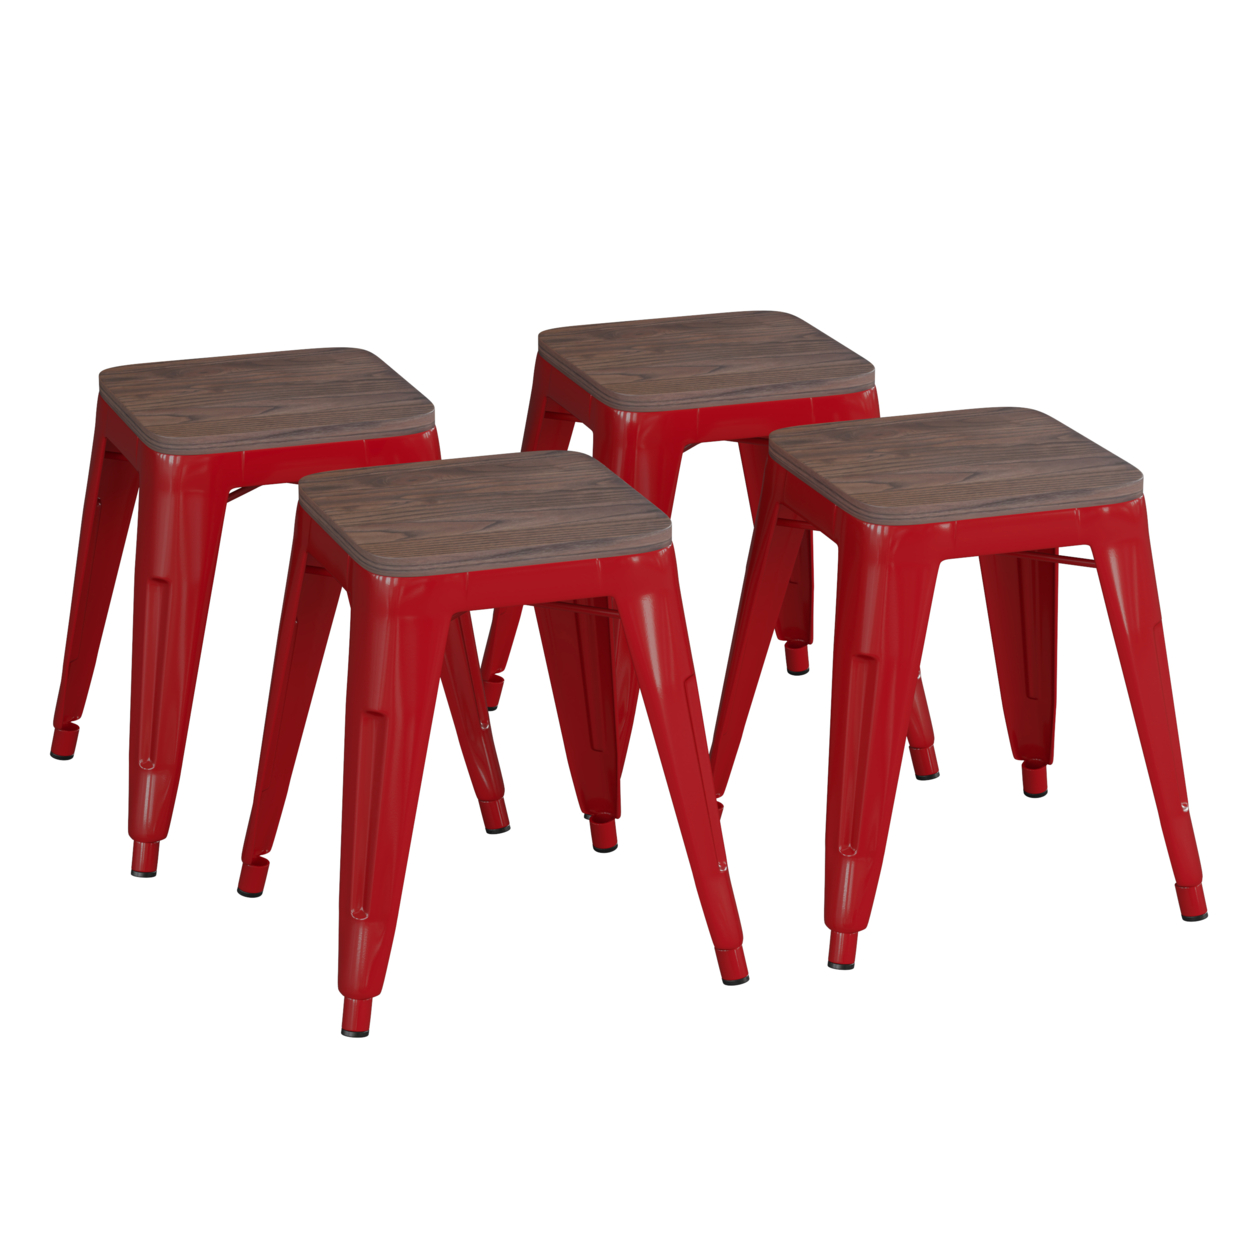 18 Backless Table Height Stool With Wooden Seat, Stackable Red Metal Indoor Dining Stool, Commercial Grade - Set Of 4